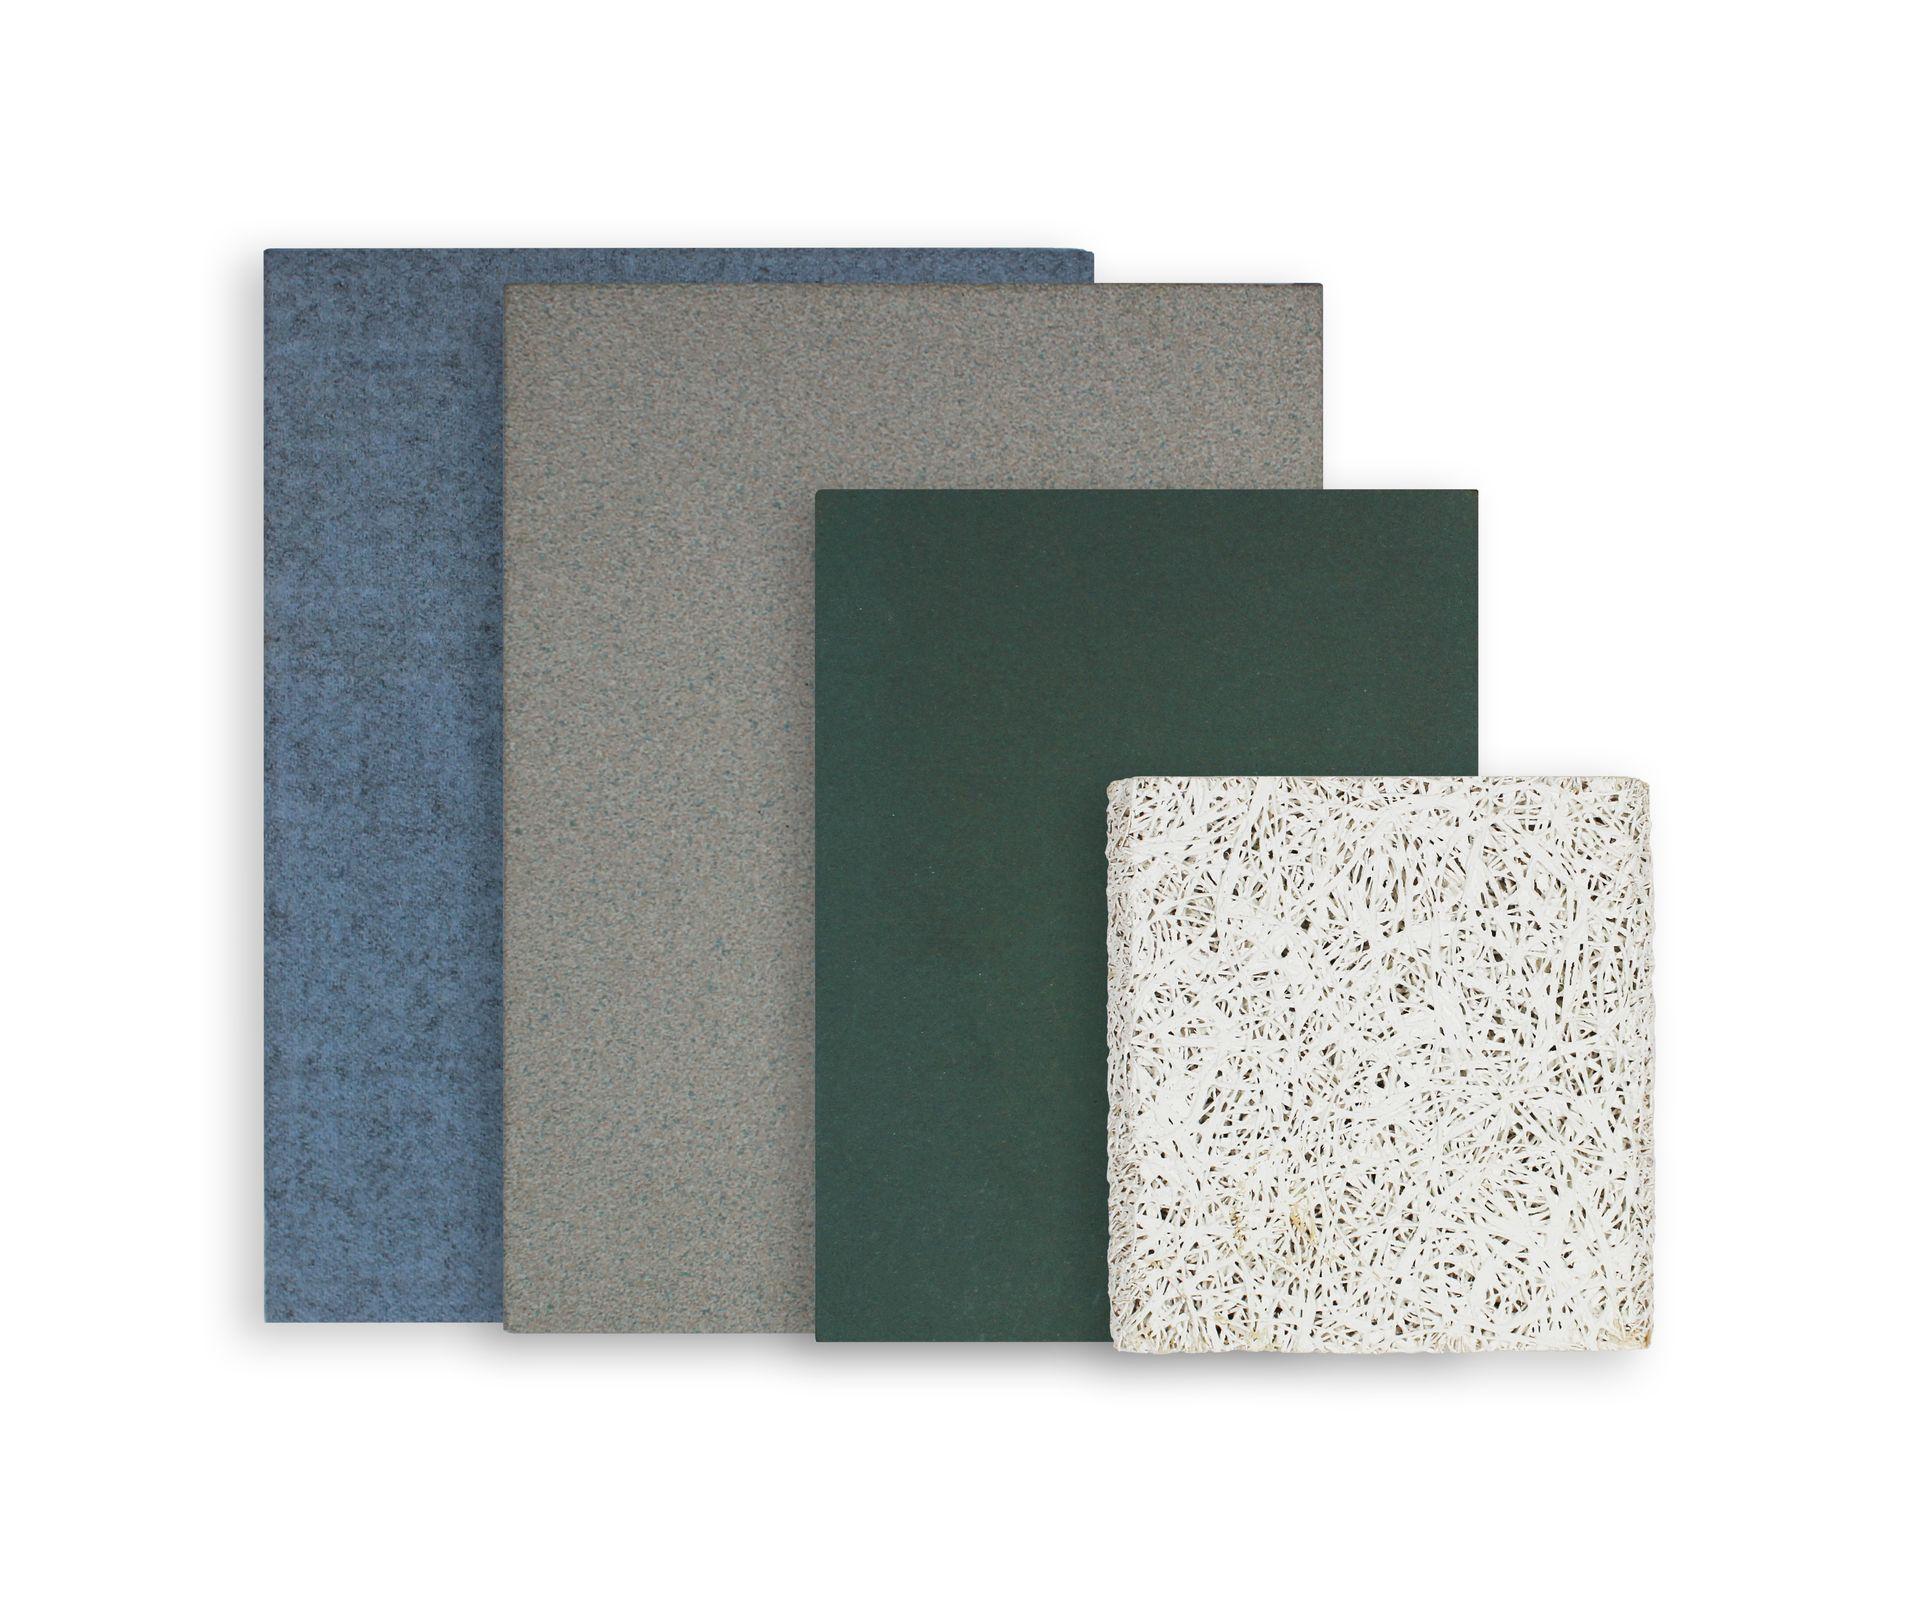 A collection of competitor products stacked on top of each other. Includes a Vinyl wrapped wall panel, a cork wall panel, a foam wall panel, and a tectum wall panel